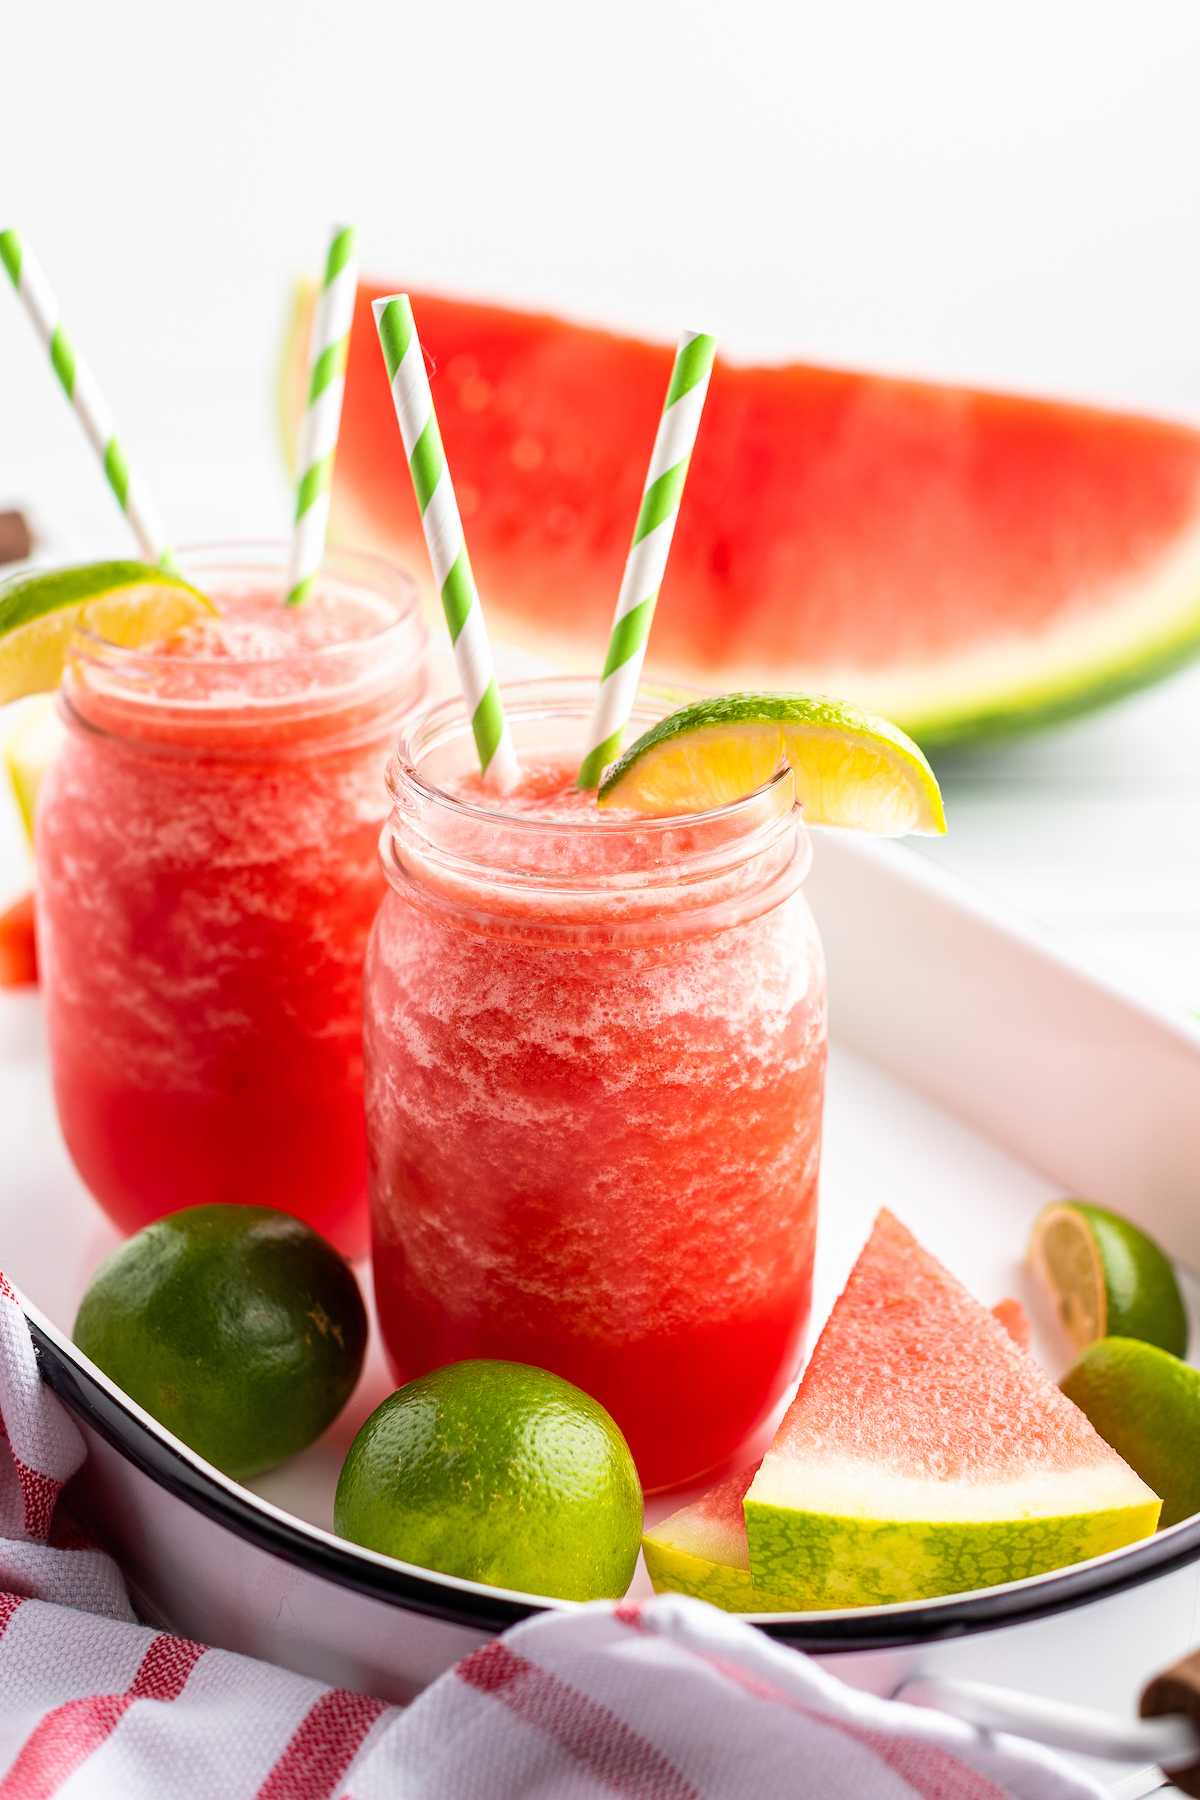 Two watermelon limeade slushies in mason jars side-by-side, garnished with lime wedges and striped straws, on a tray with watermelon slices and limes.